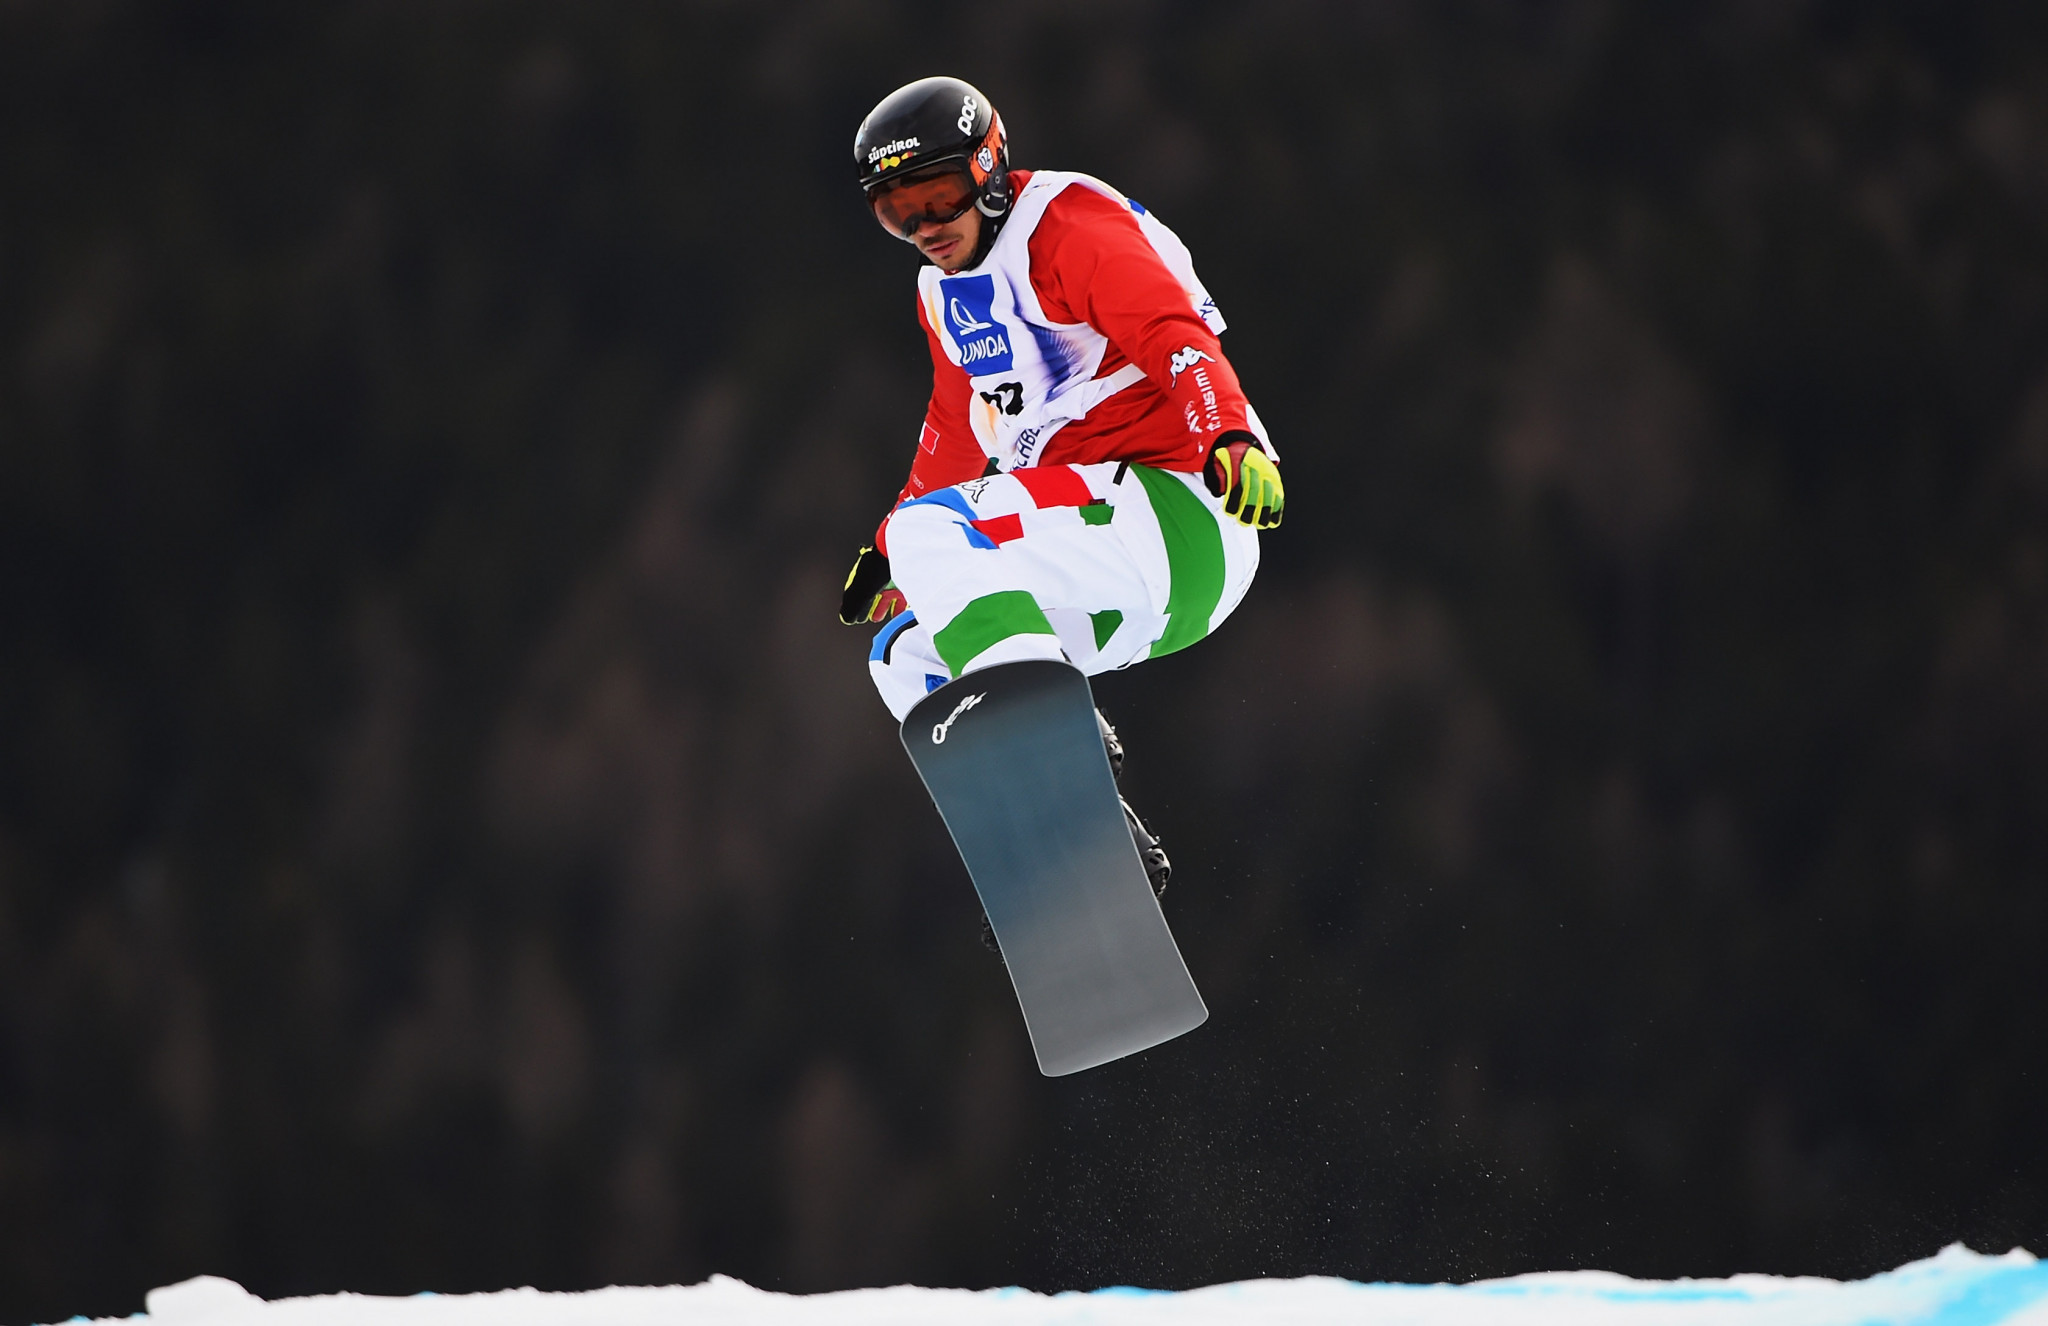 Omar Visintin topped the men's qualification event on home snow in Cervinia ©Getty Images